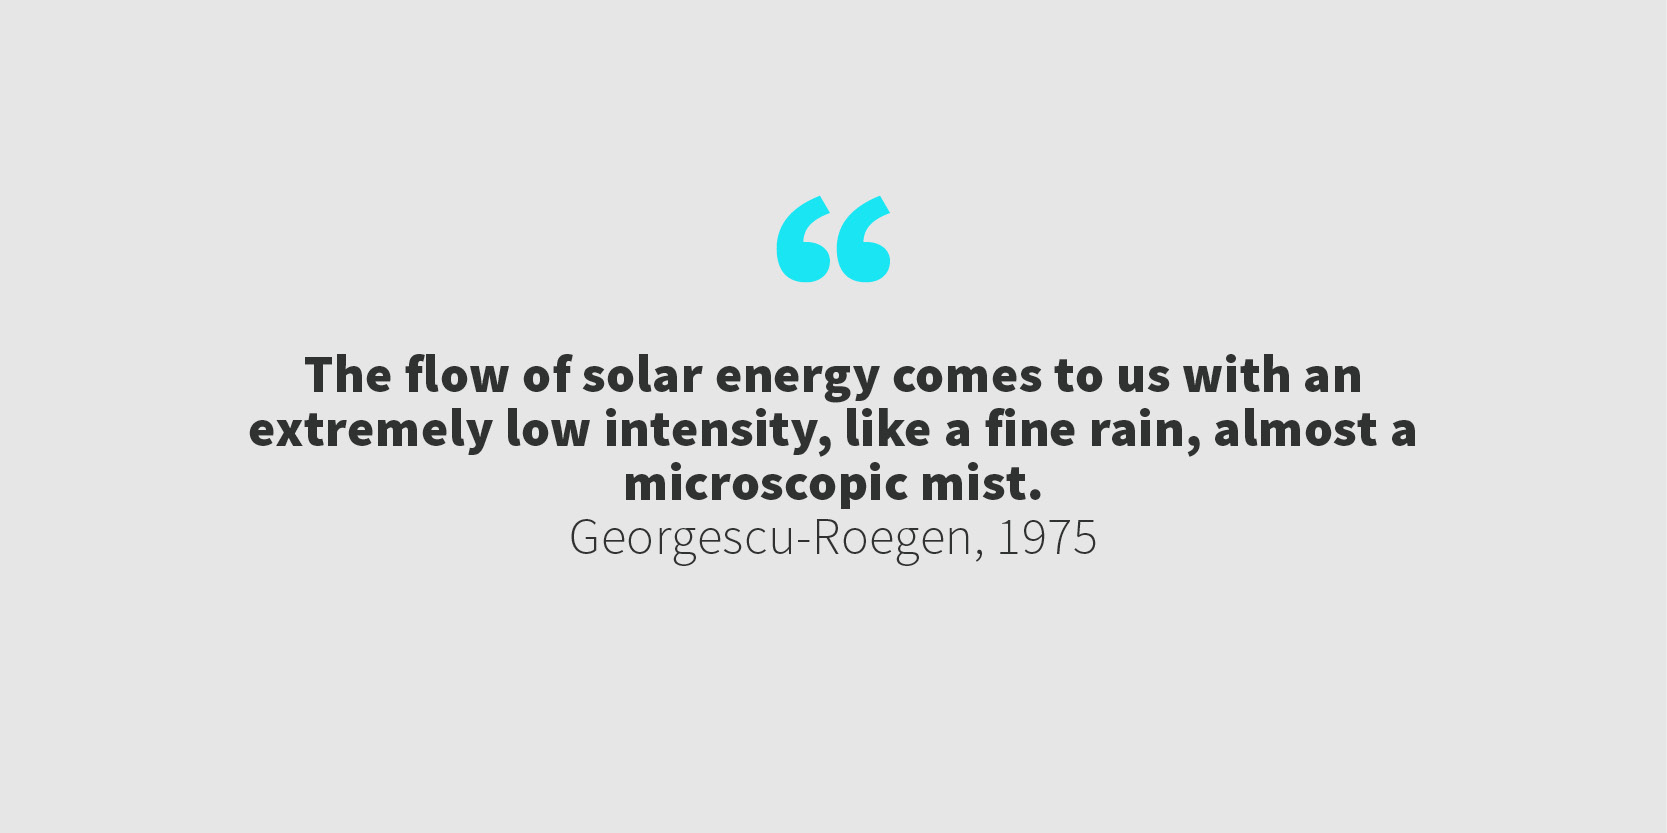 ‘The flow of solar energy comes to us with an extremely low intensity, like a fine rain, almost a microscopic mist,’